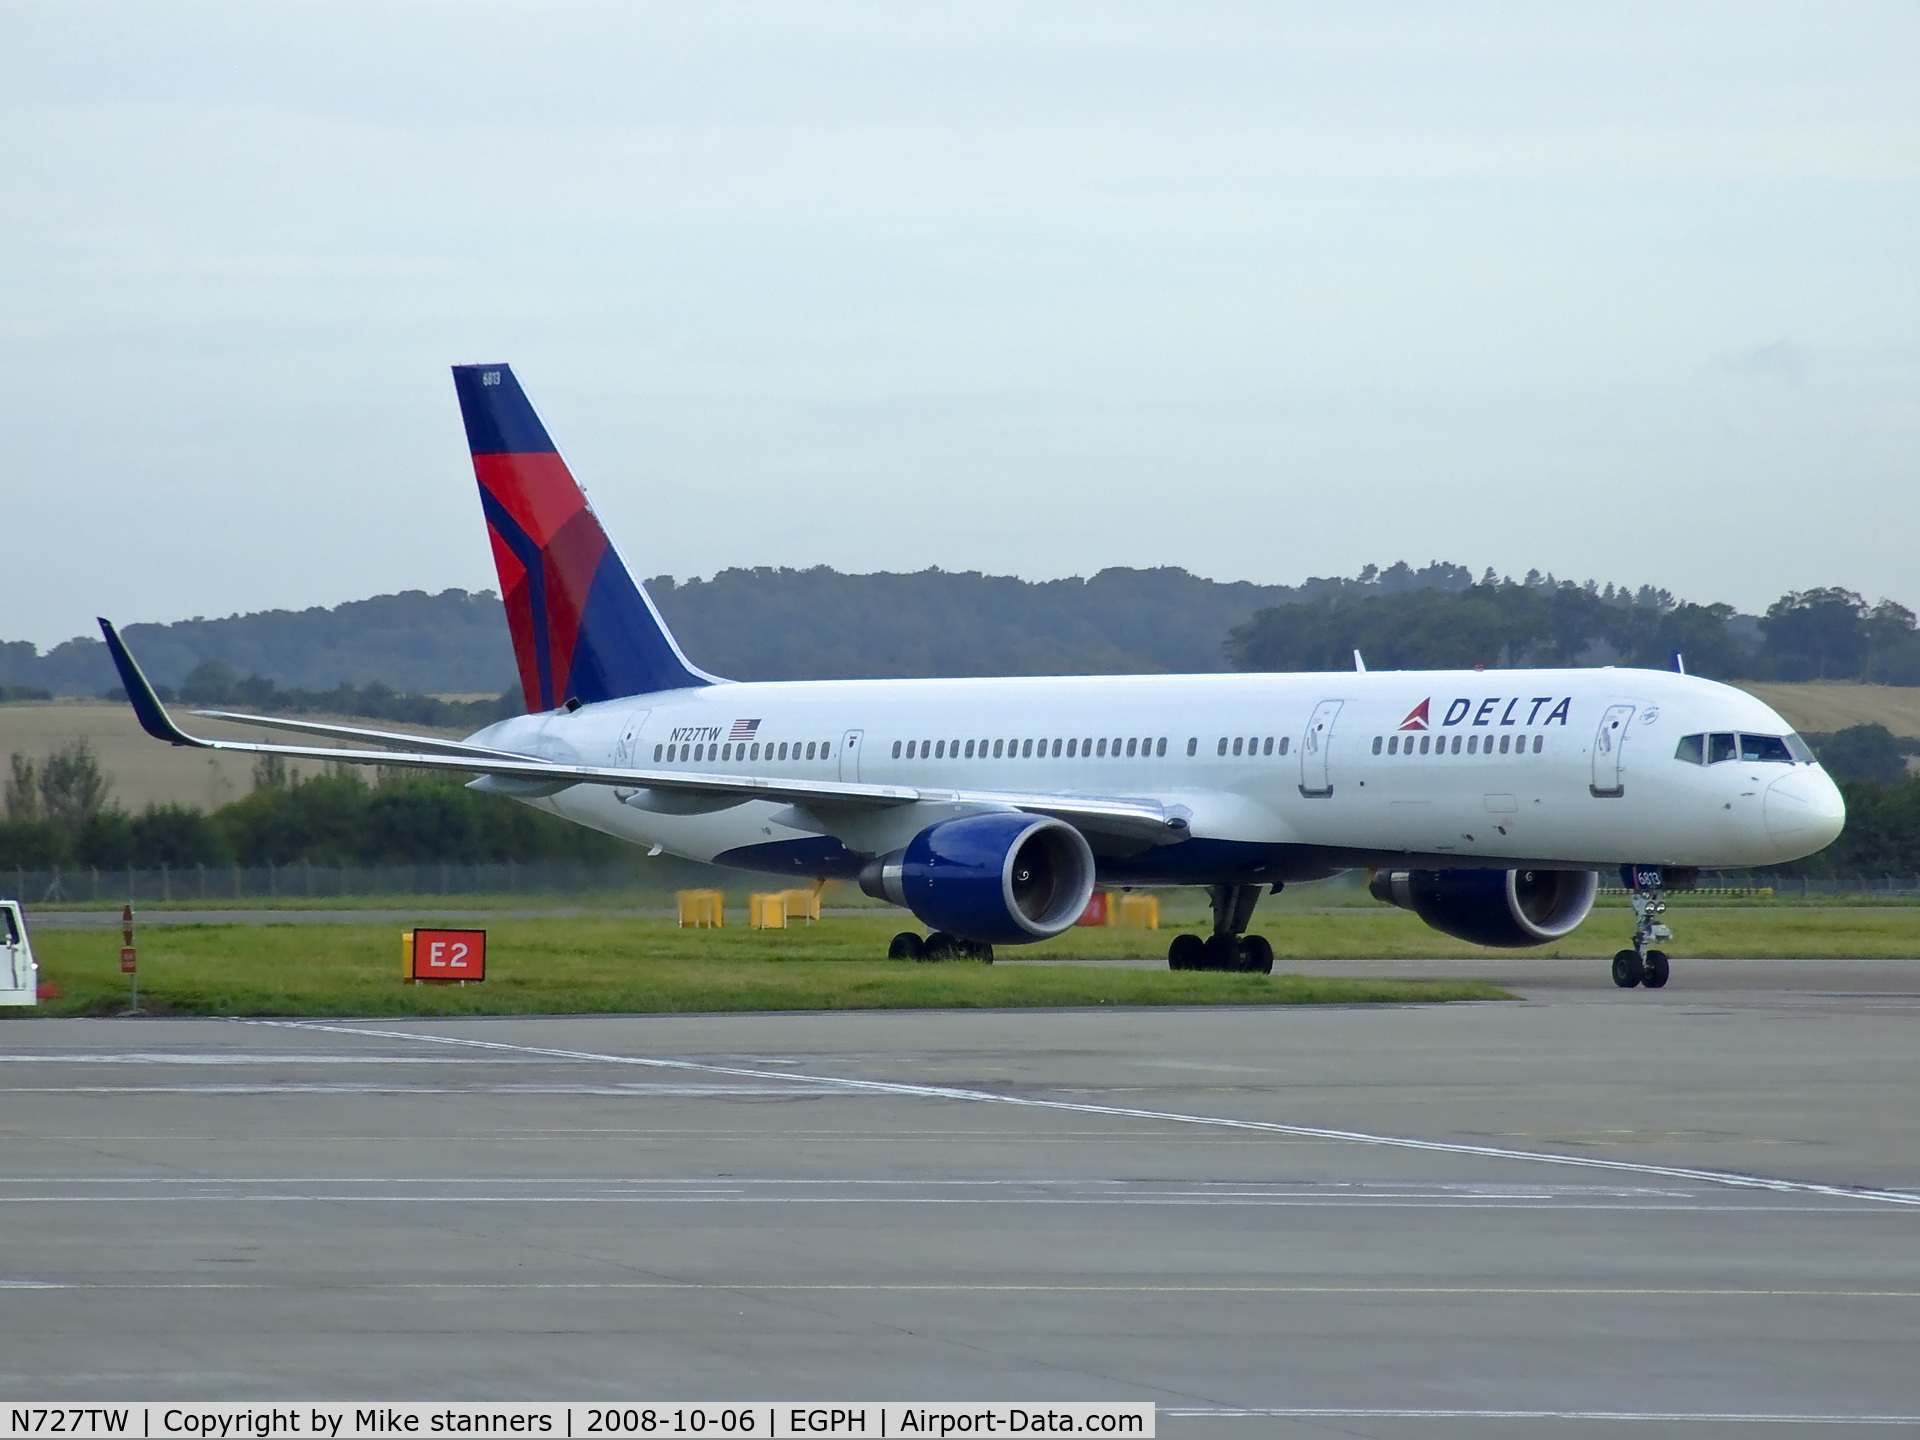 N727TW, 1999 Boeing 757-231 C/N 30340, Delta airlines B757 Taxiing into EDI,Delta no longer operate from Edinburgh